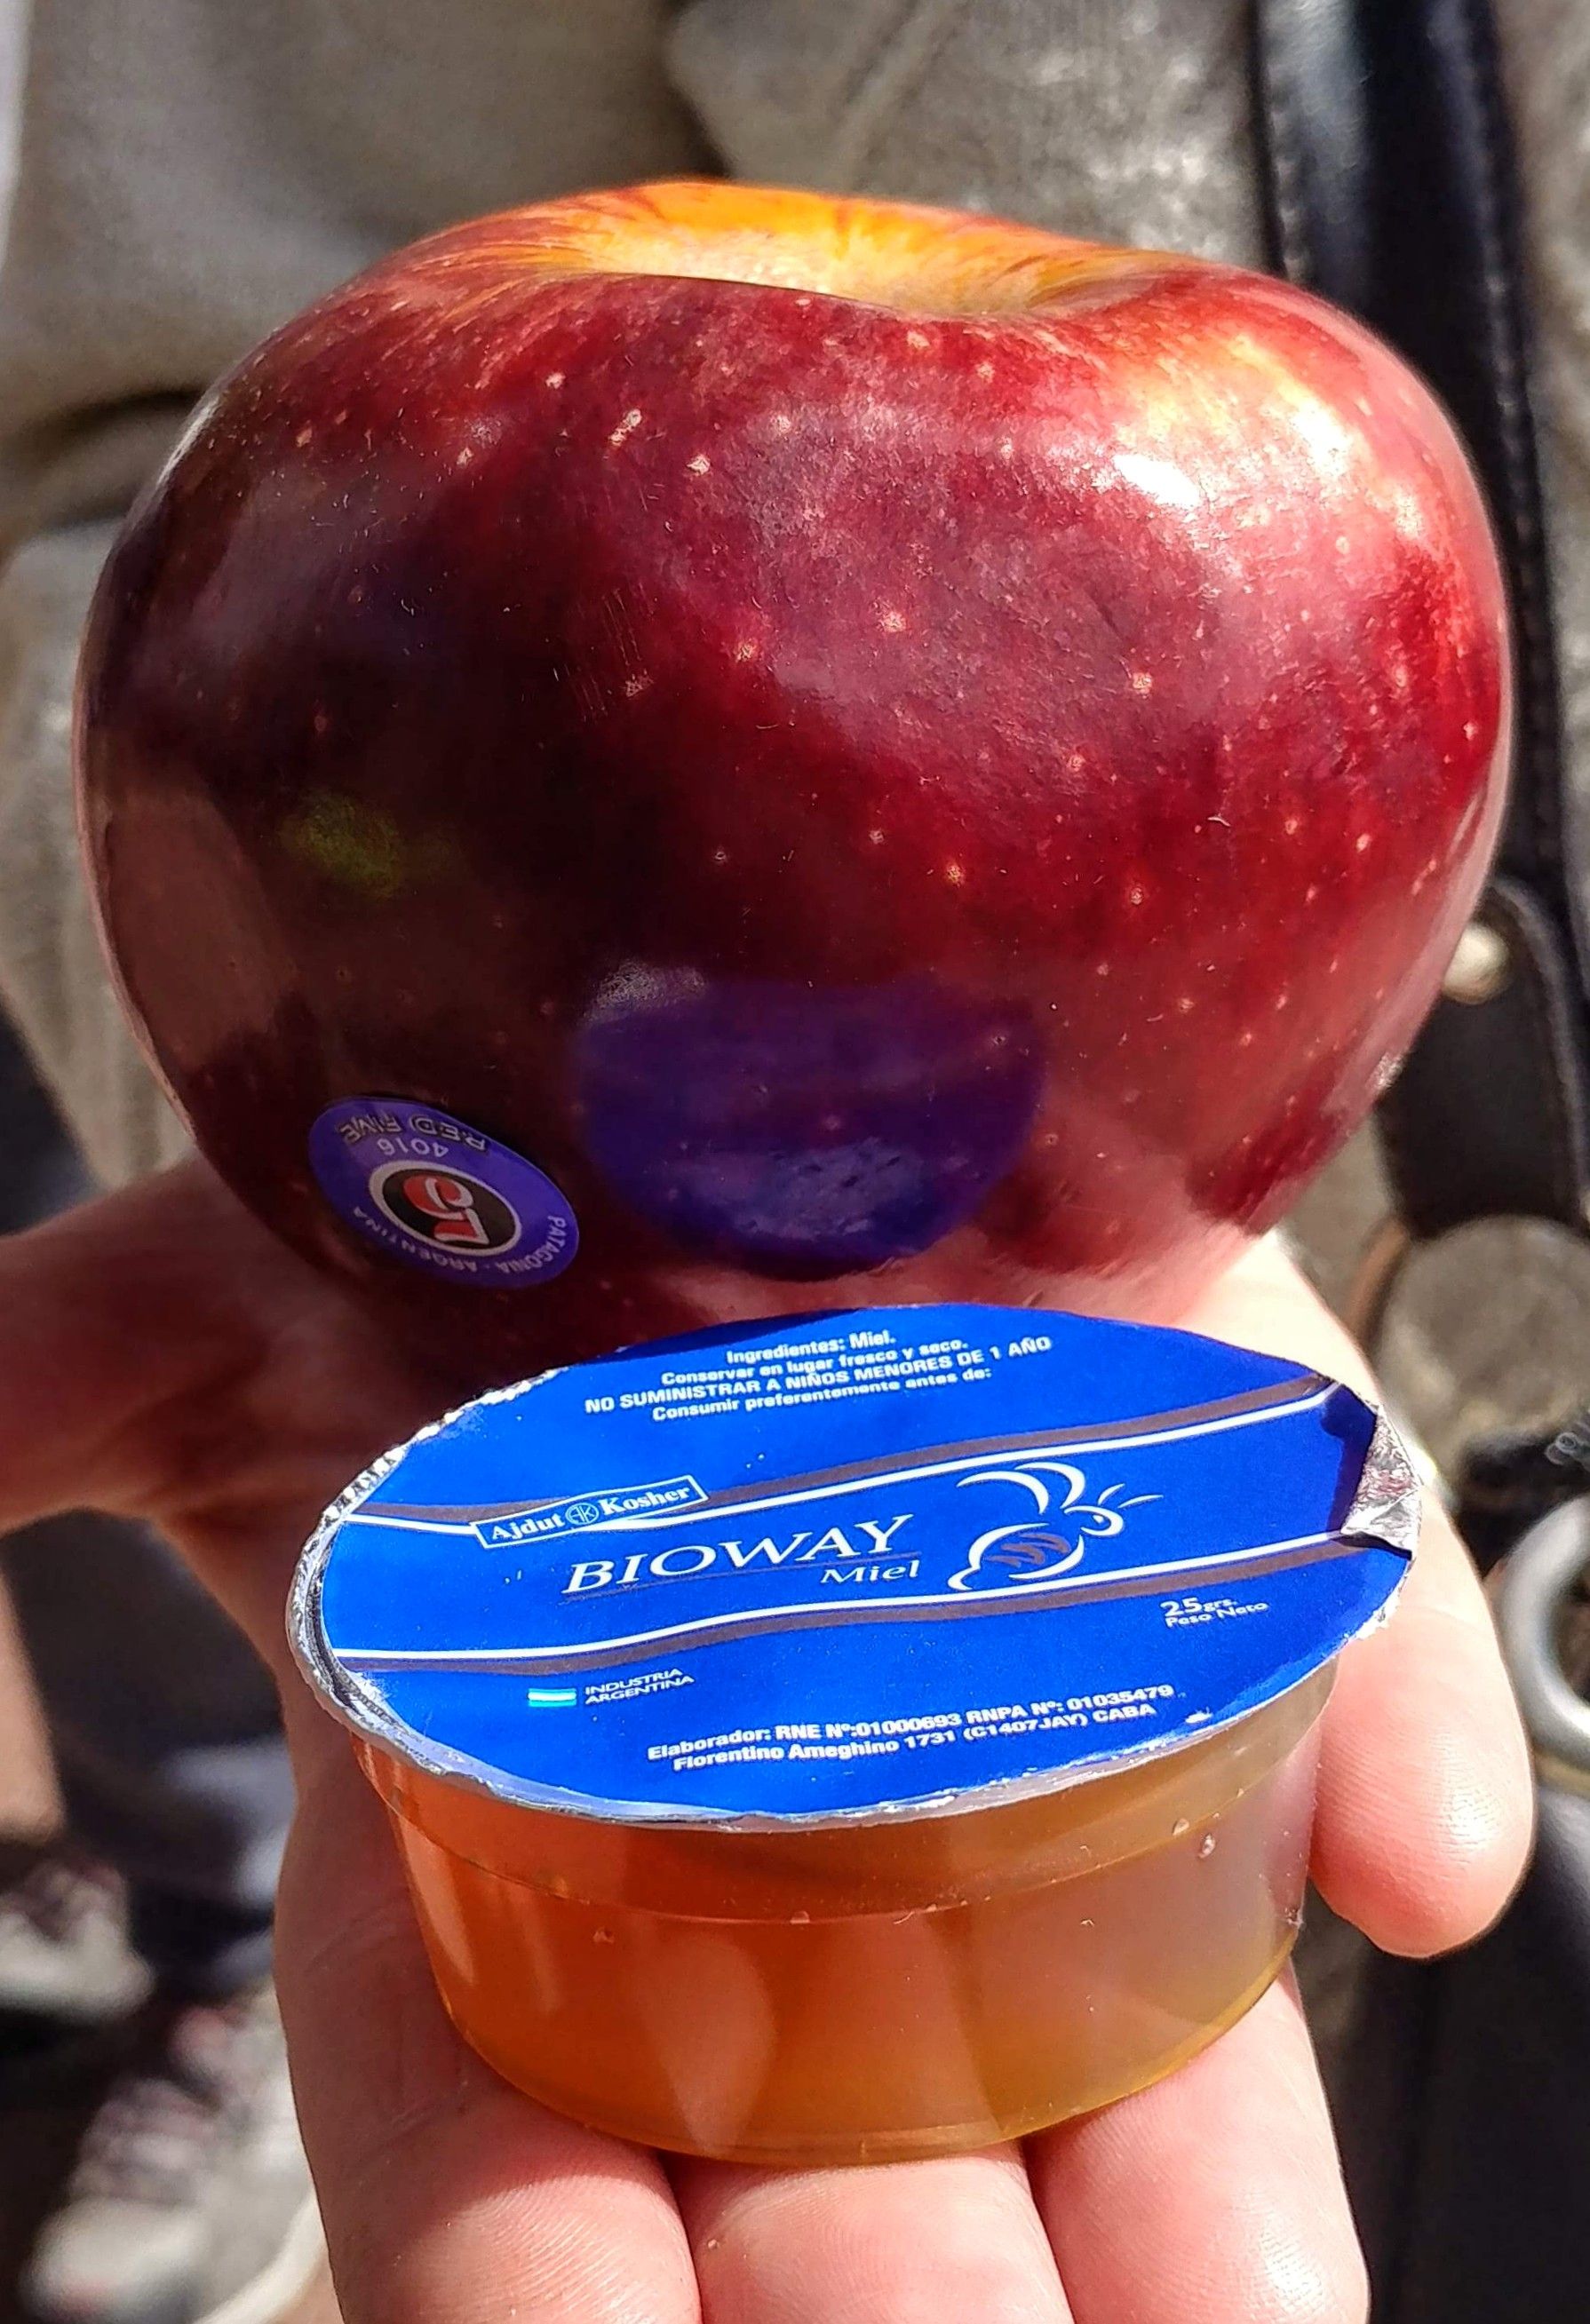 Caption: A red apple and a sealed packet of honey.